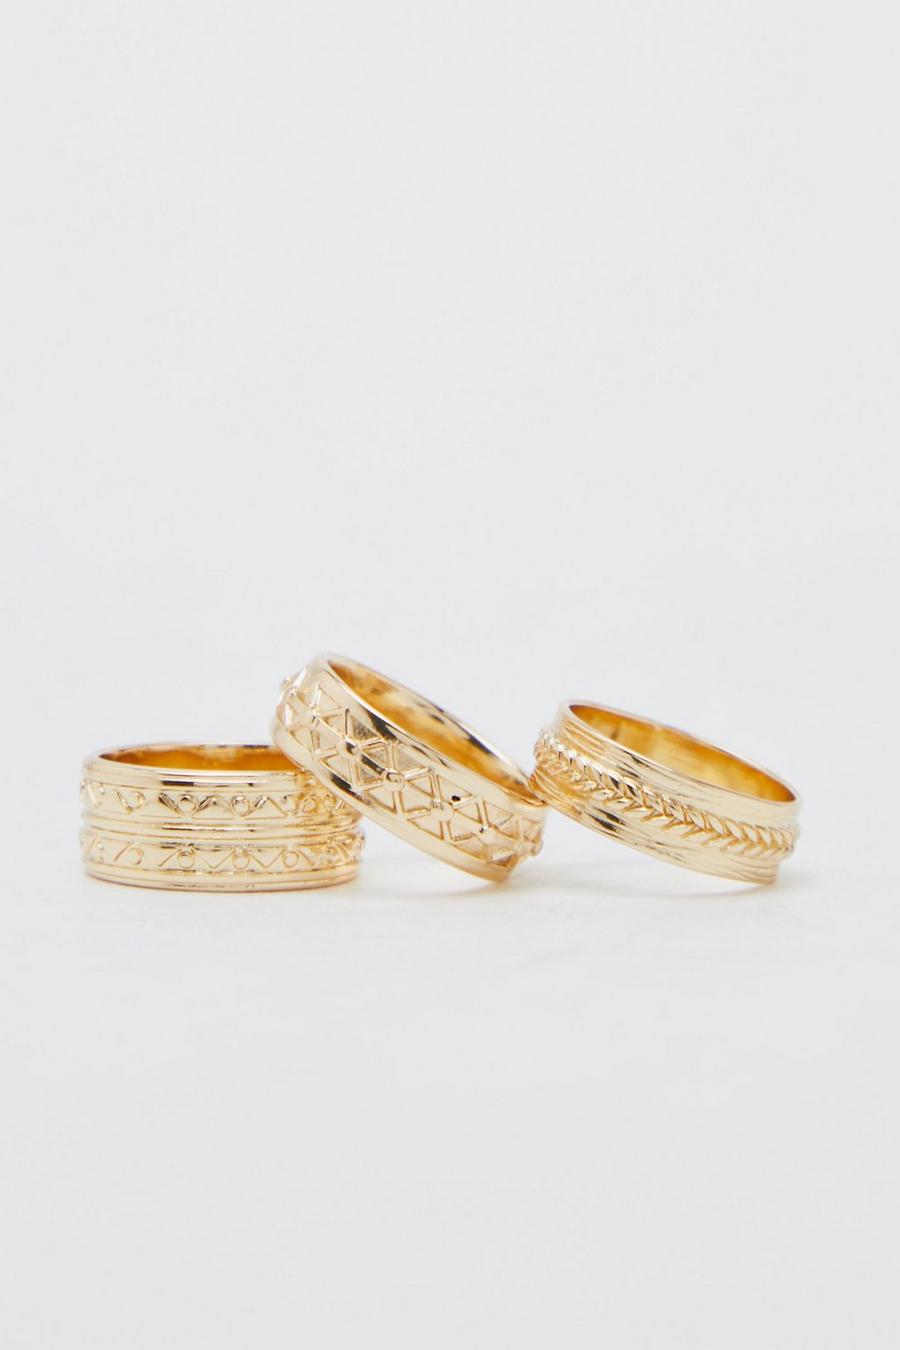 Gold metallic Textured And Rope Design 3 Pack Rings